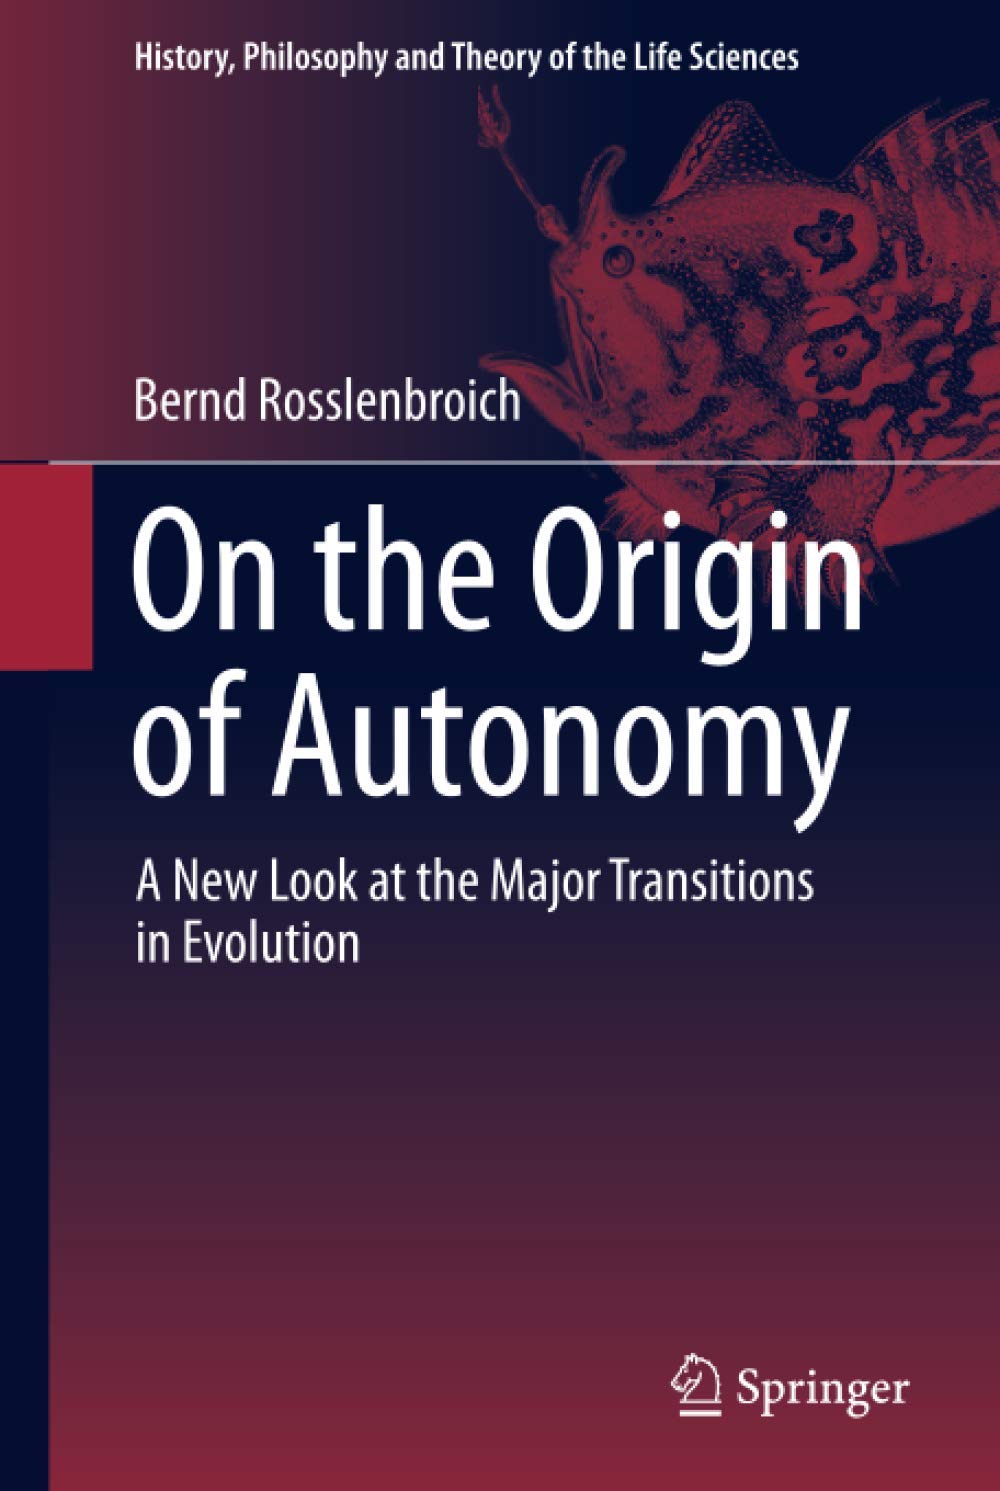 On the Origin of Autonomy (History, Philosophy and Theory of the Life Sciences, 5)